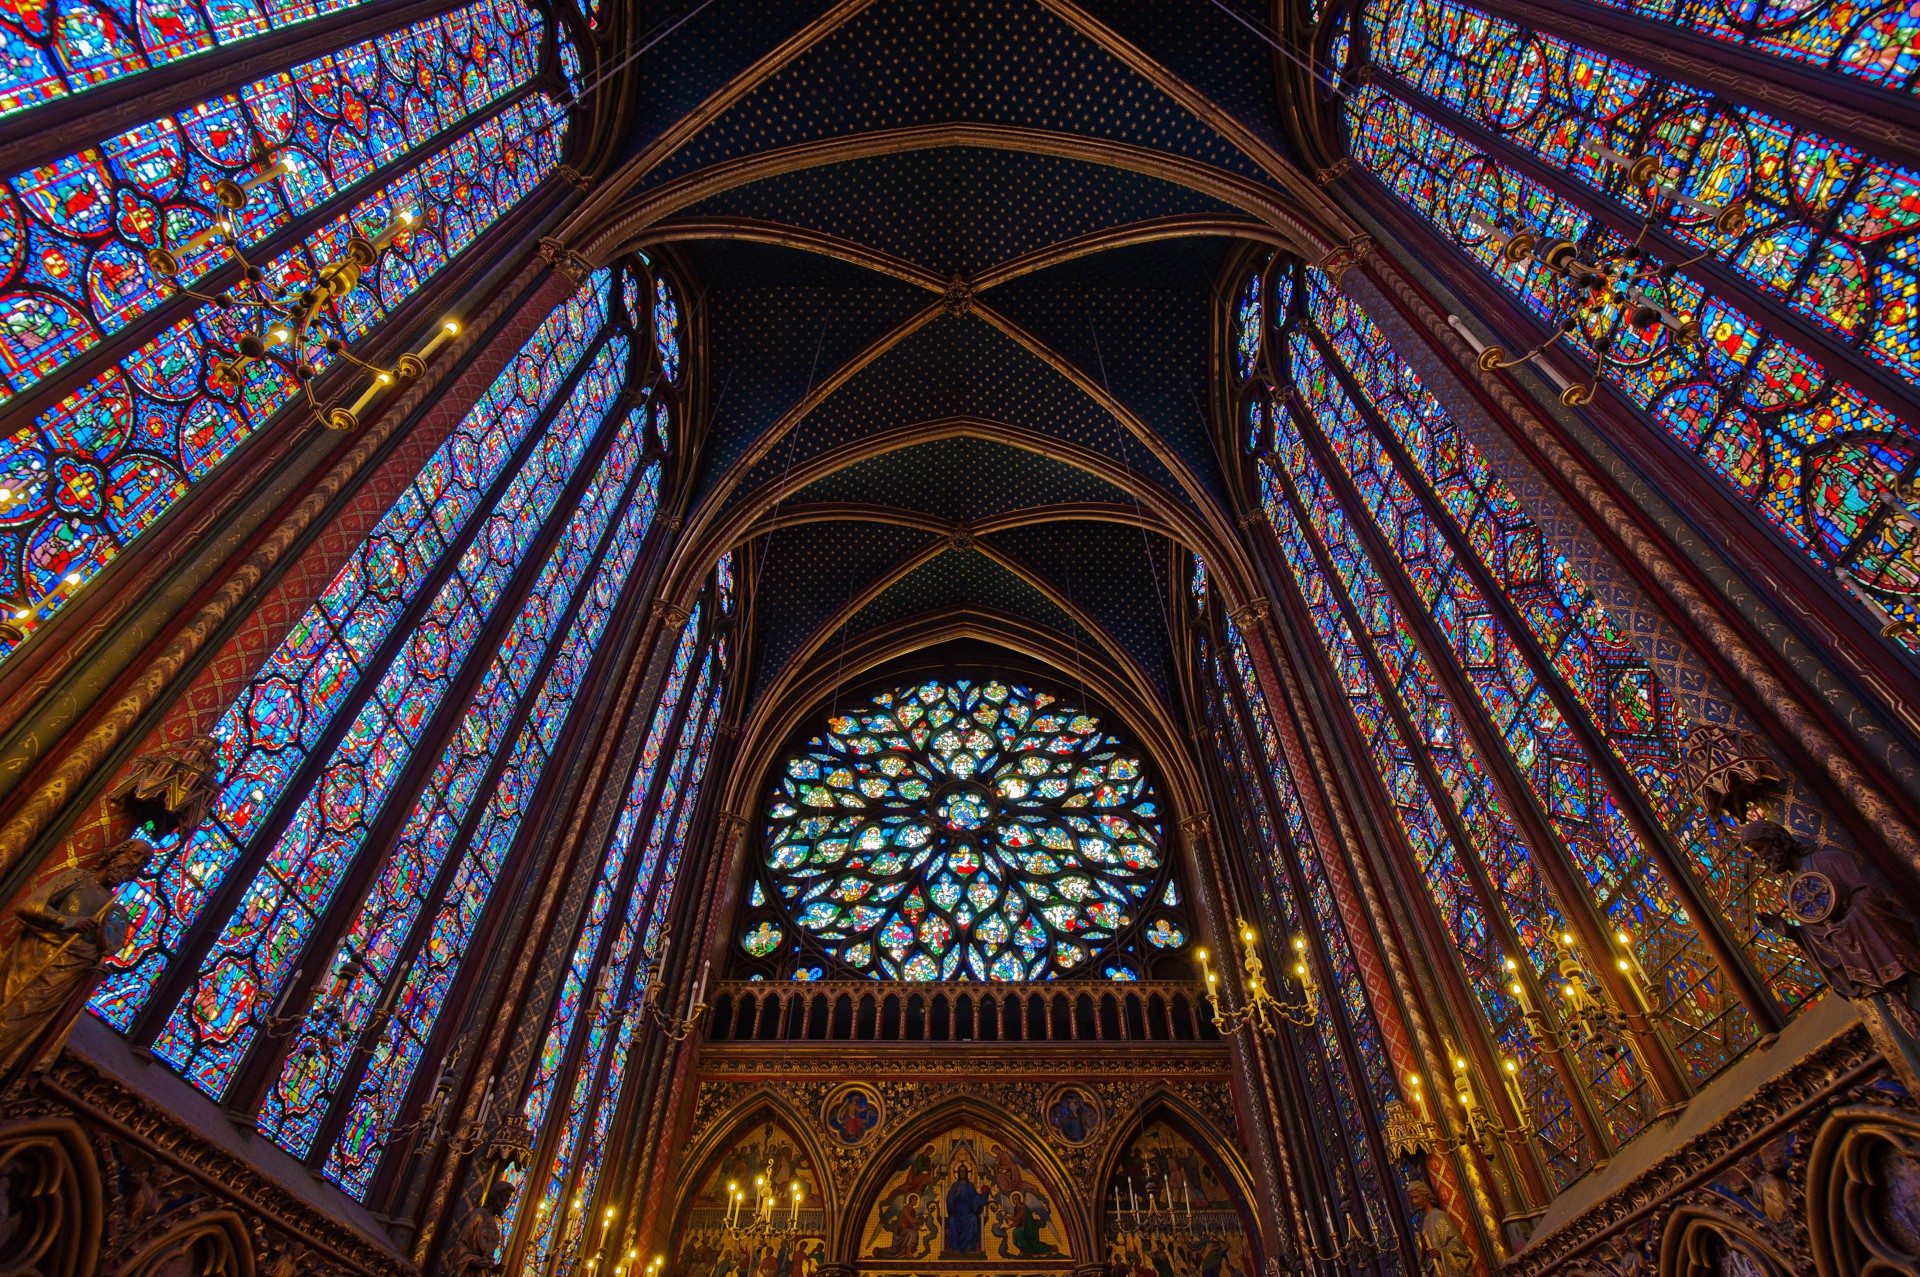 Stained glass of Sainte-Chapelle in paris